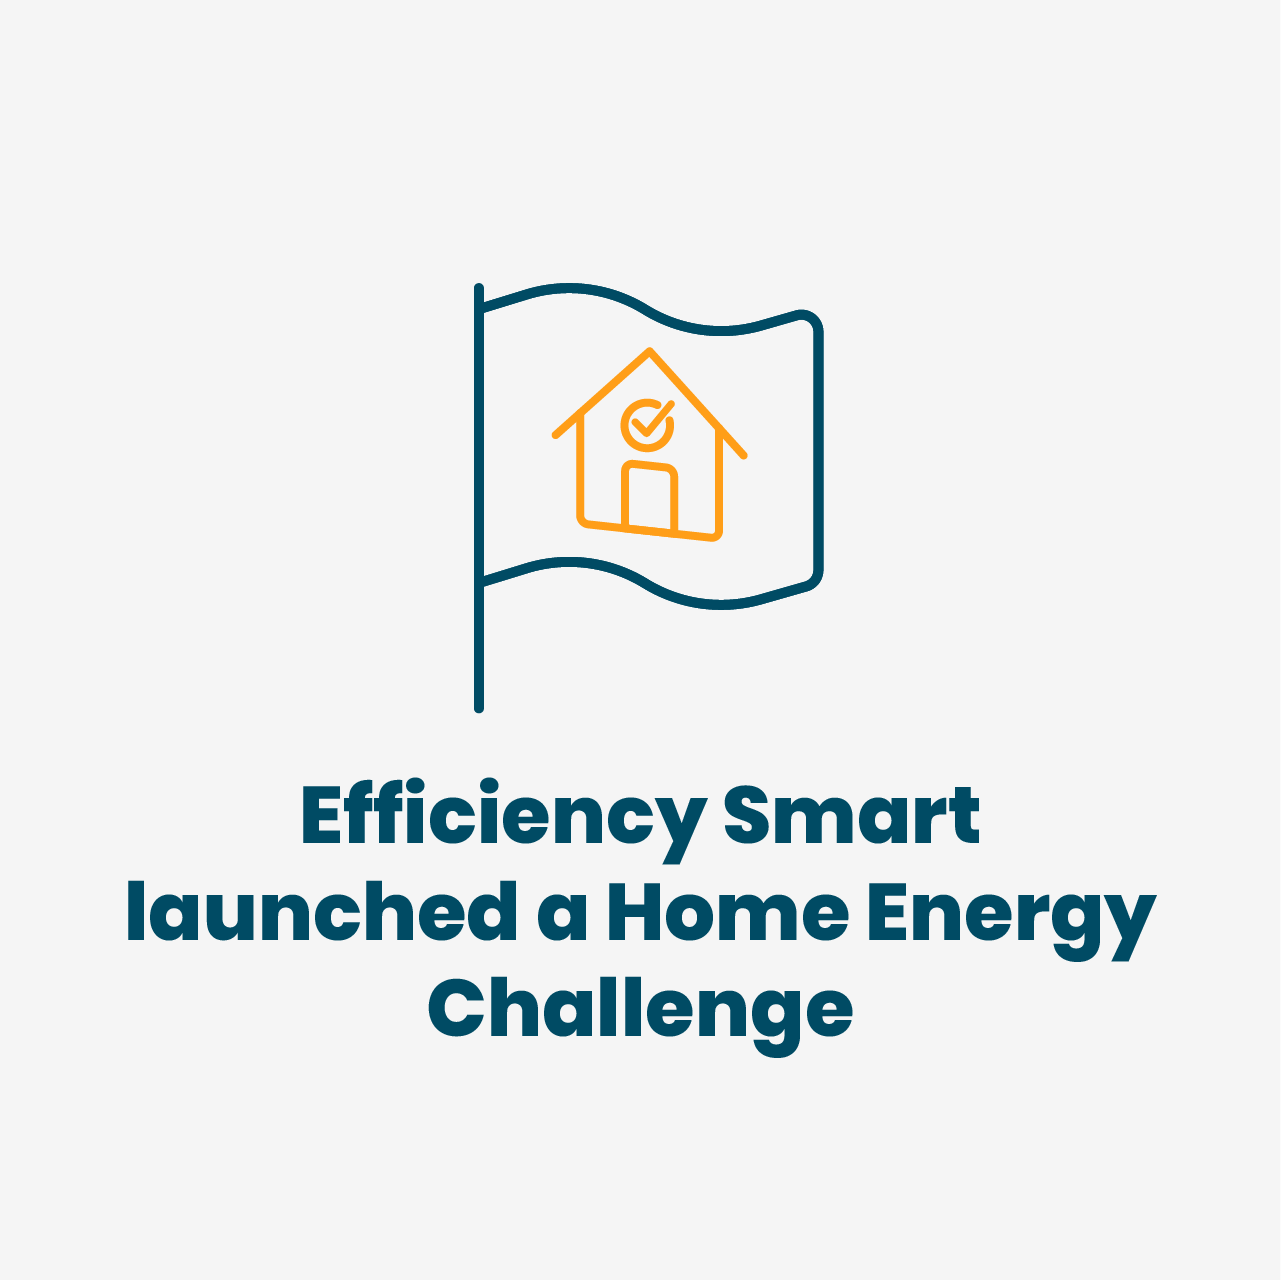 Efficiency Smart launched a Home Energy Challenge